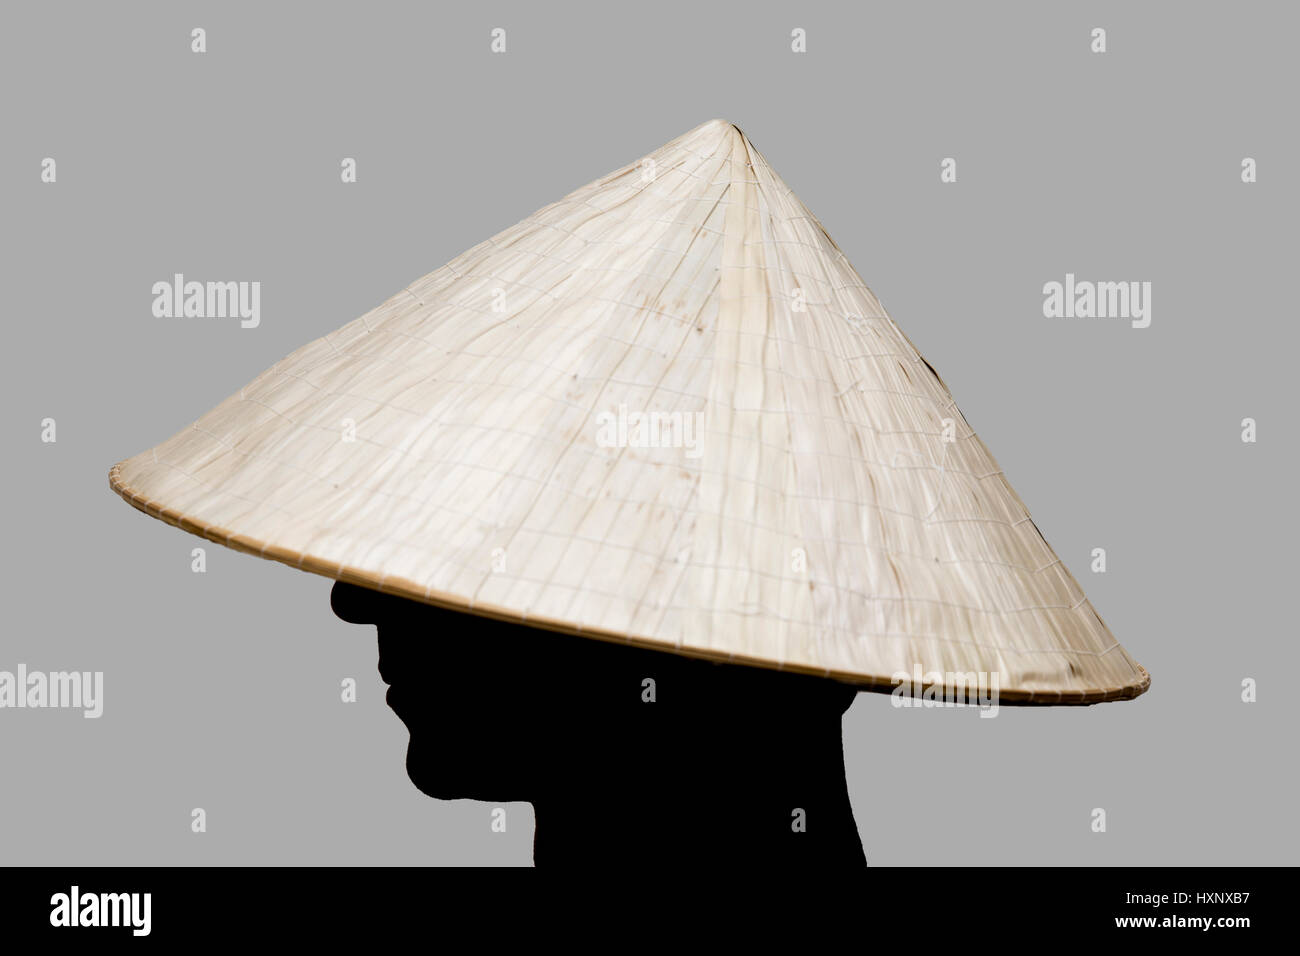 Man with traditional hat from Asia made of wicker Stock Photo